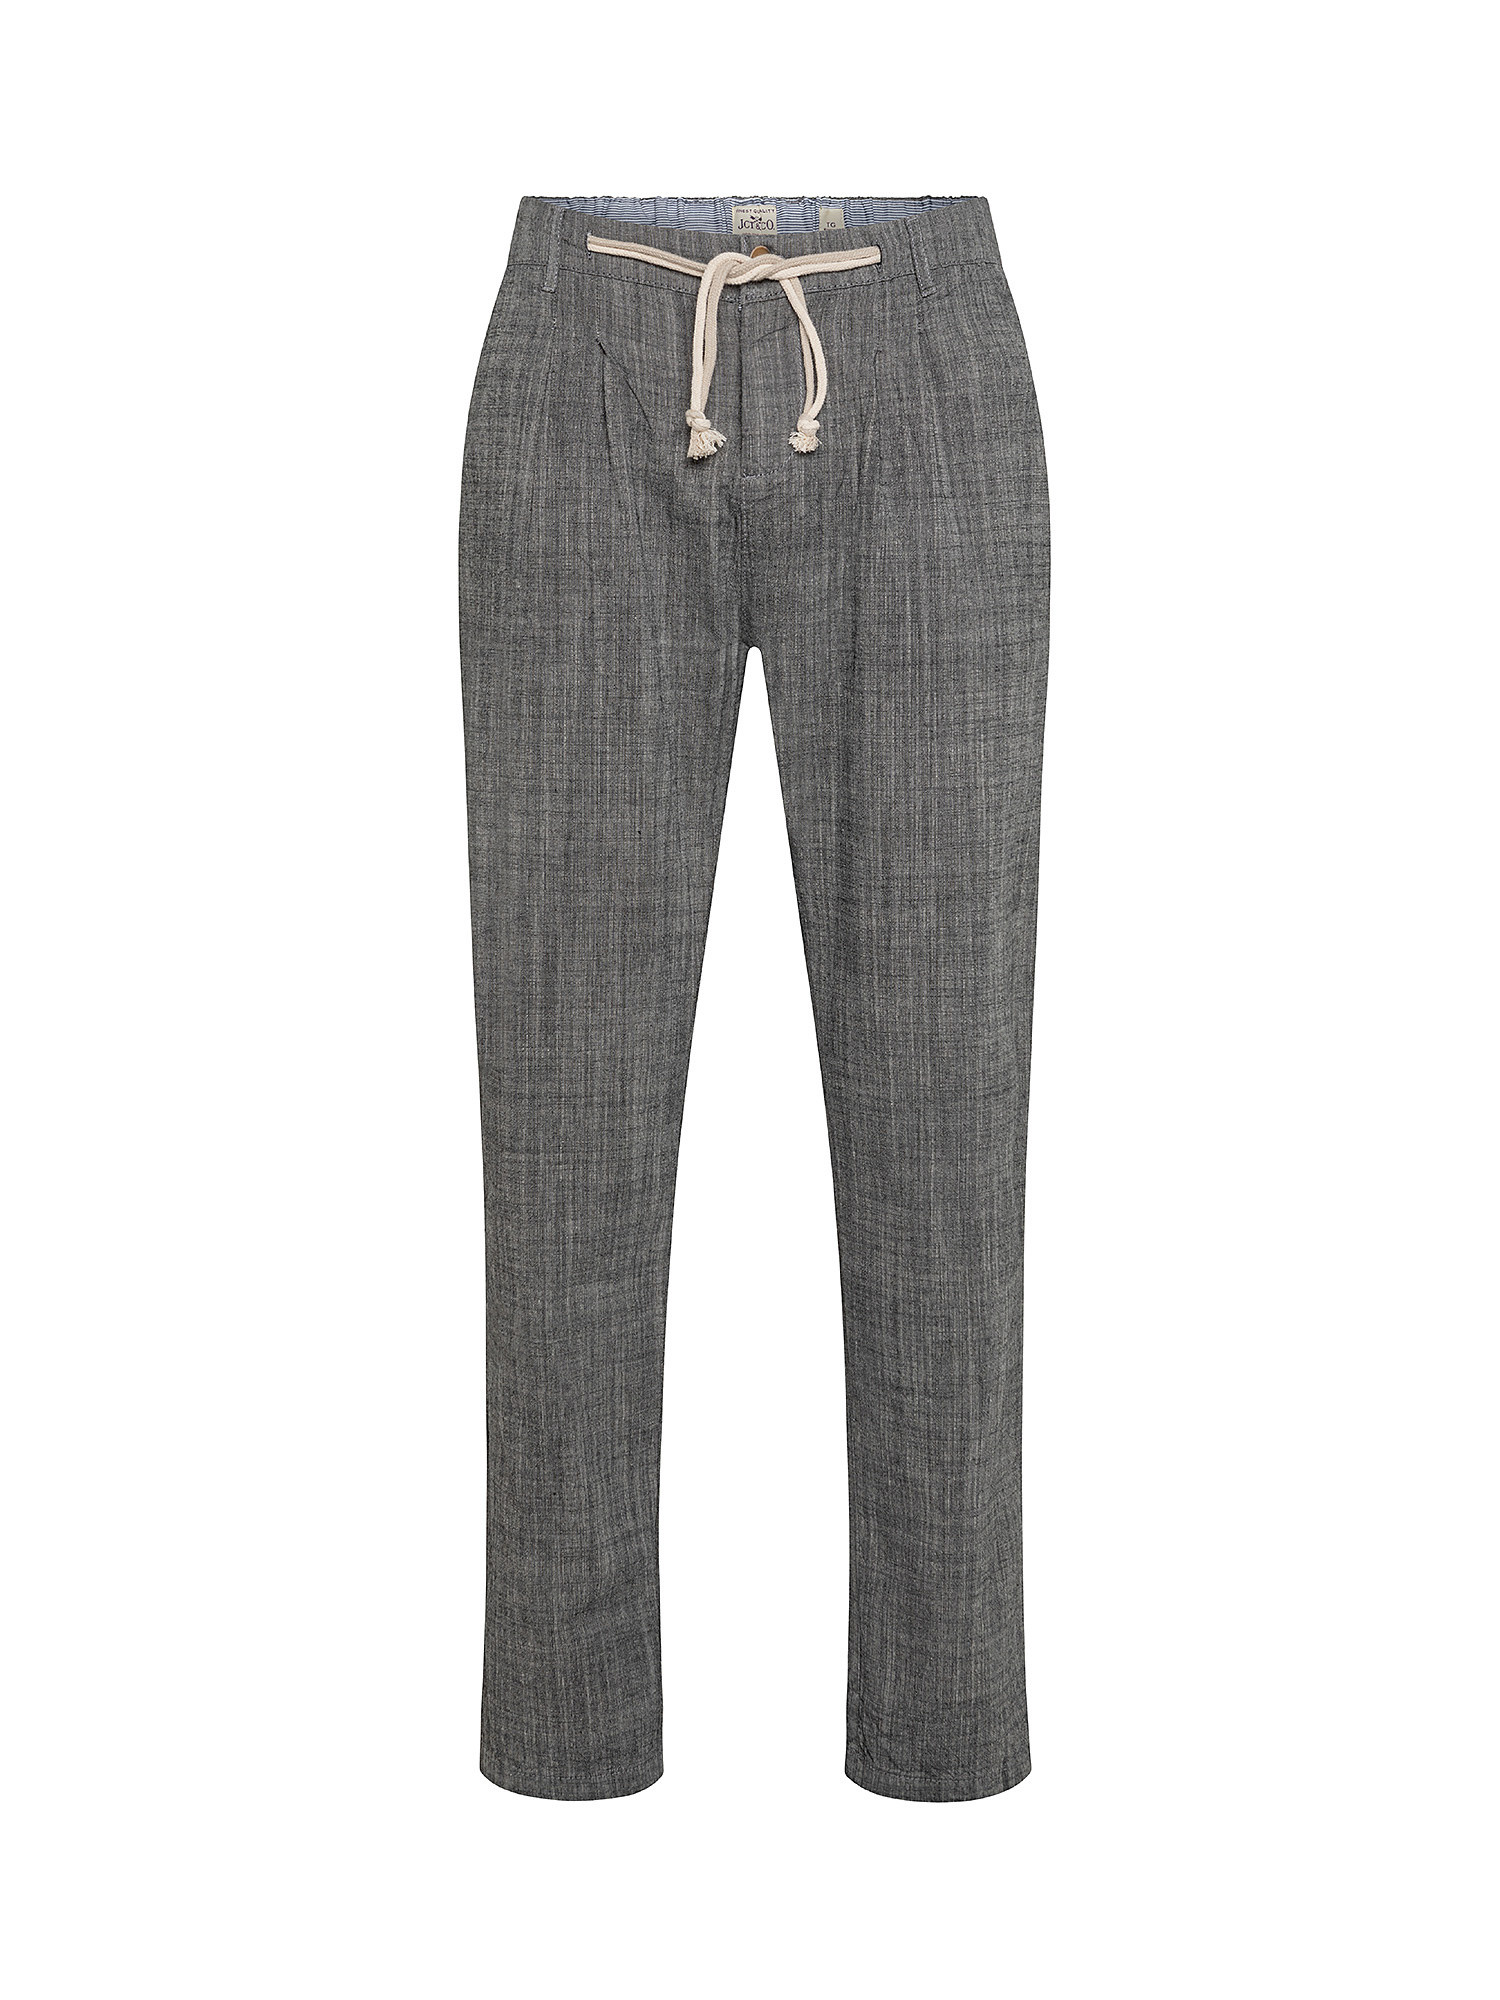 Trousers with drawstring, Grey, large image number 0